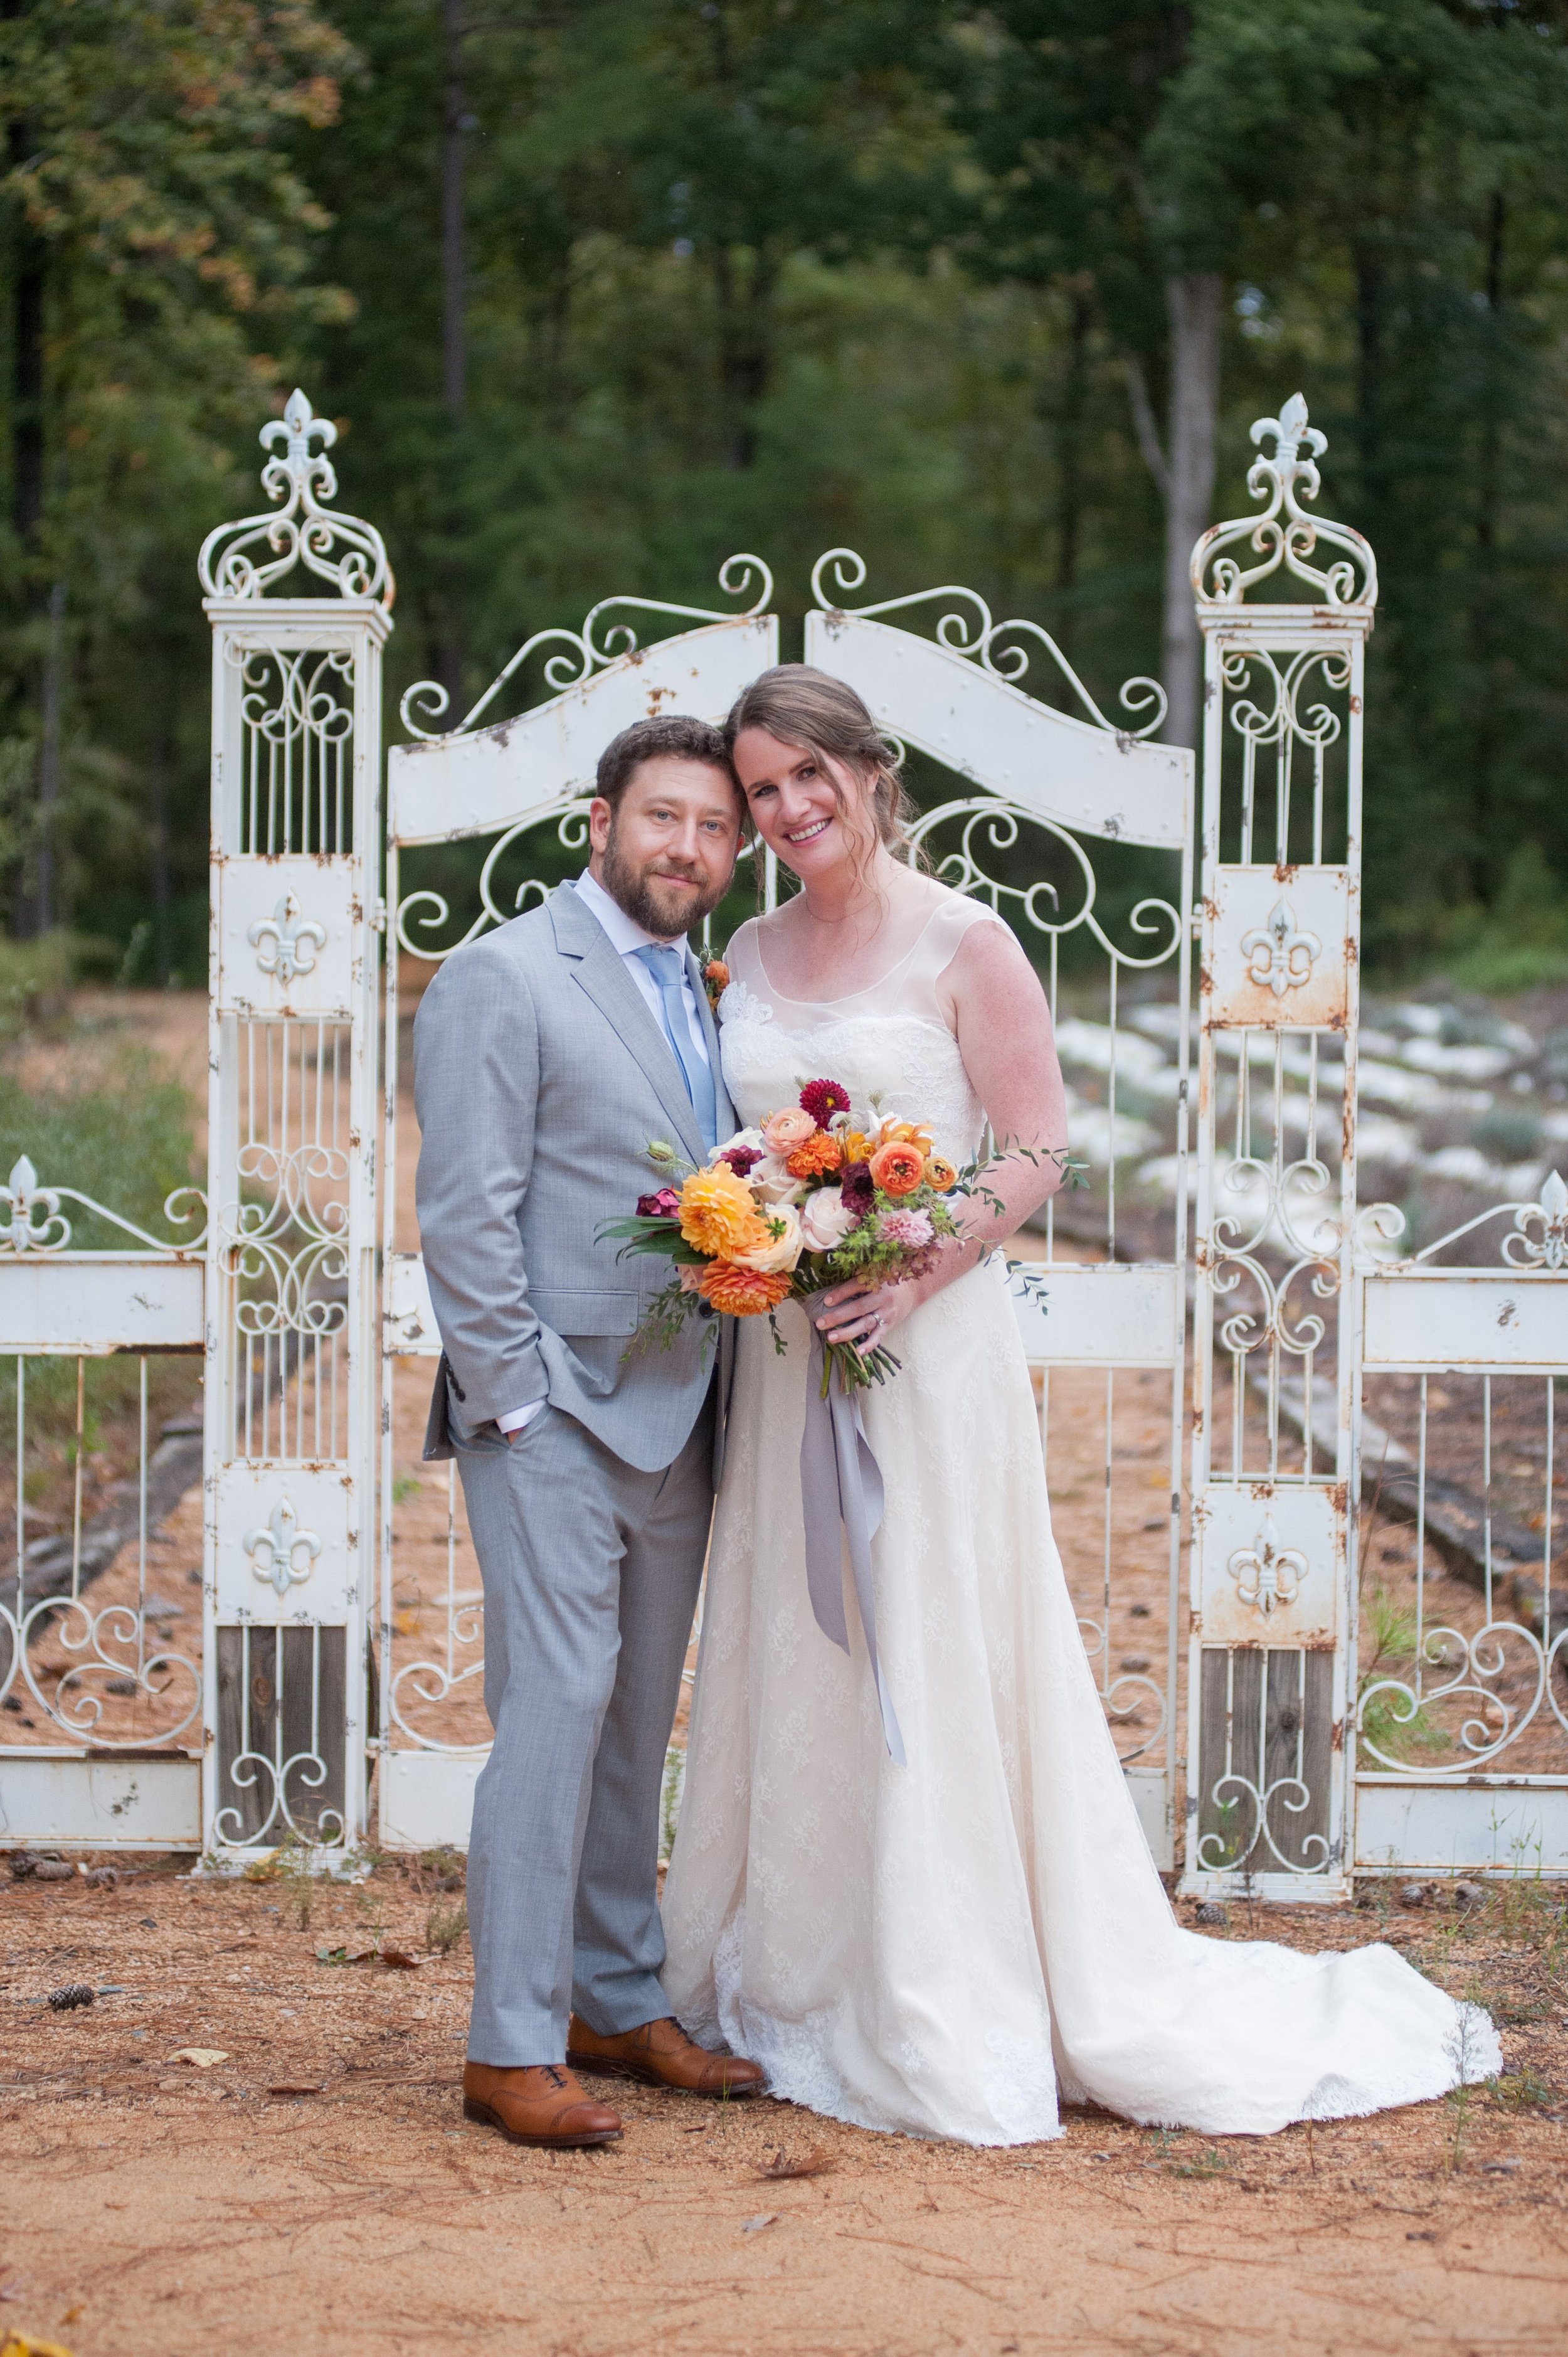 White Gate Bride and Groom Lavender Oaks Farm Chapel Hill NC Wedding Fancy This Photography